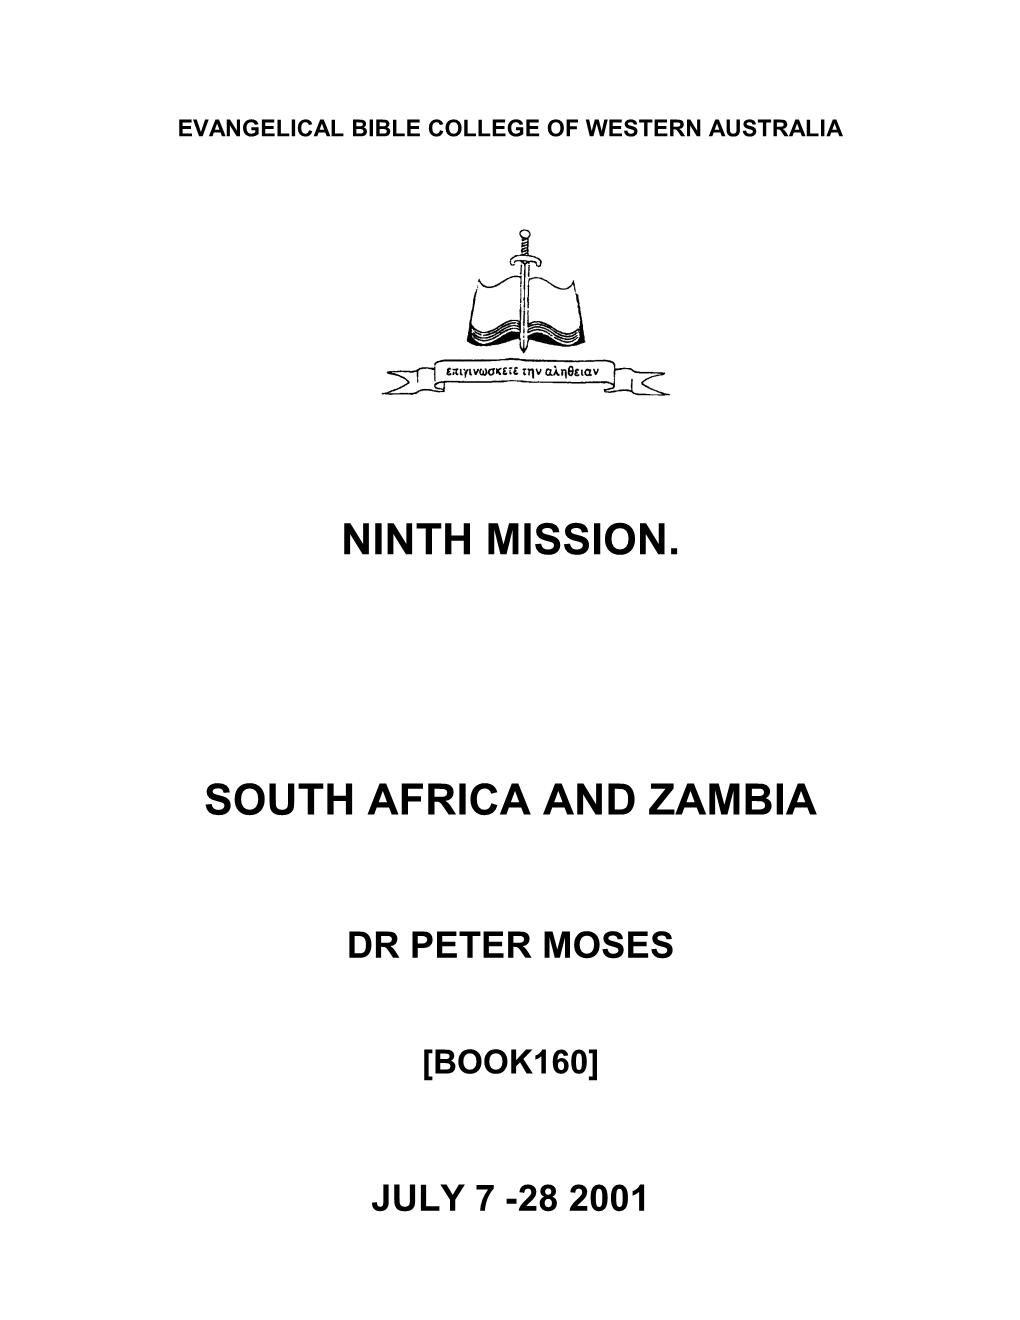 Mission to South Africa & Zambia - July 7 -28 2001